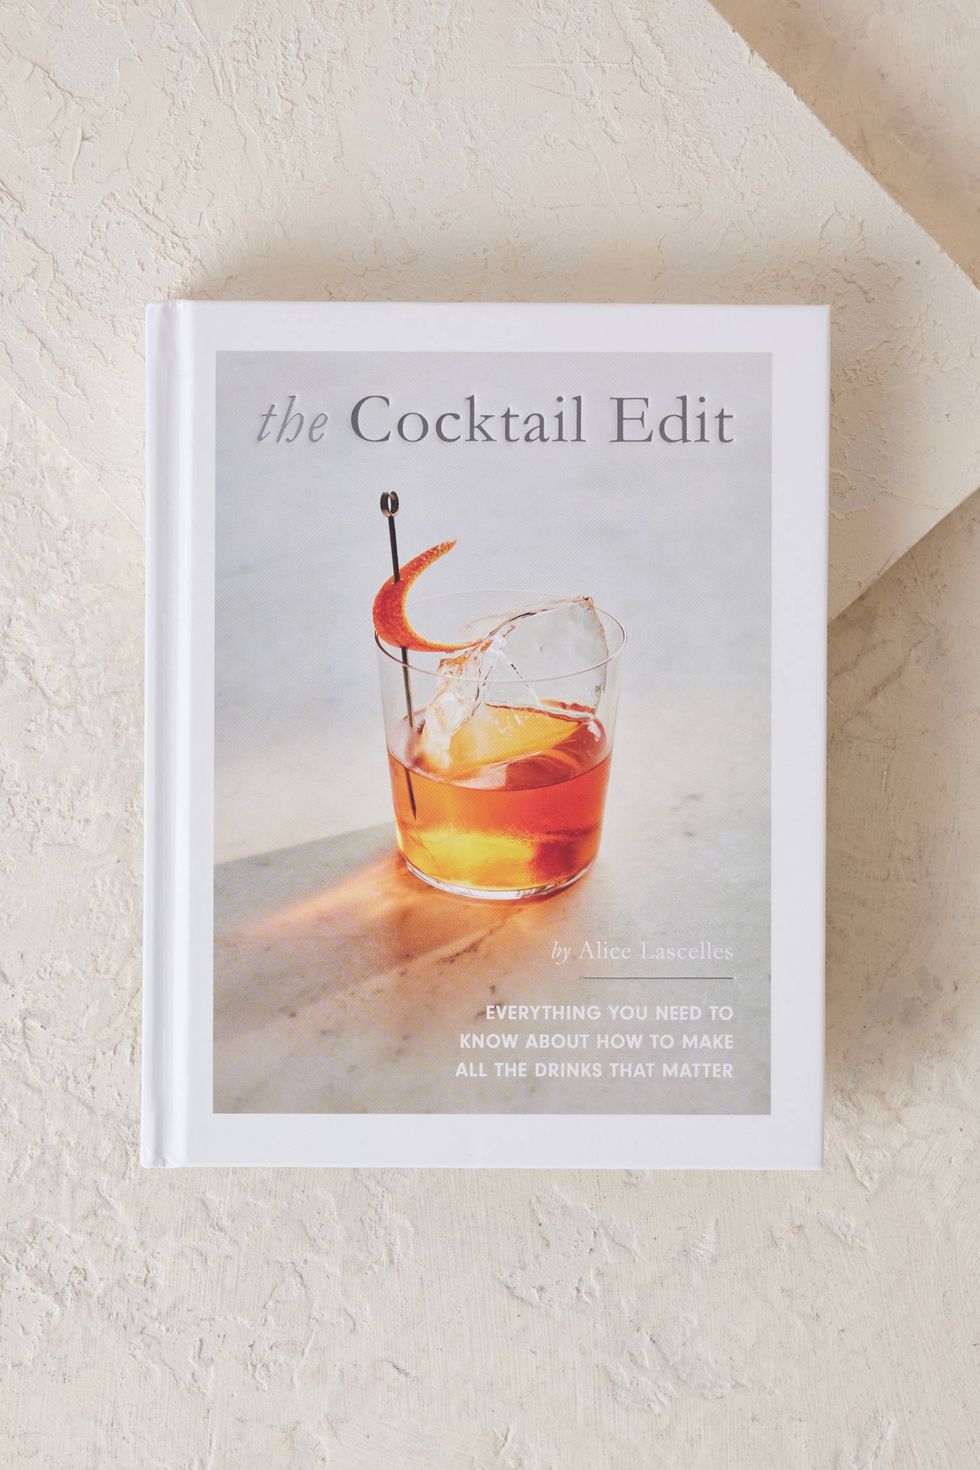 The Cocktail Edit